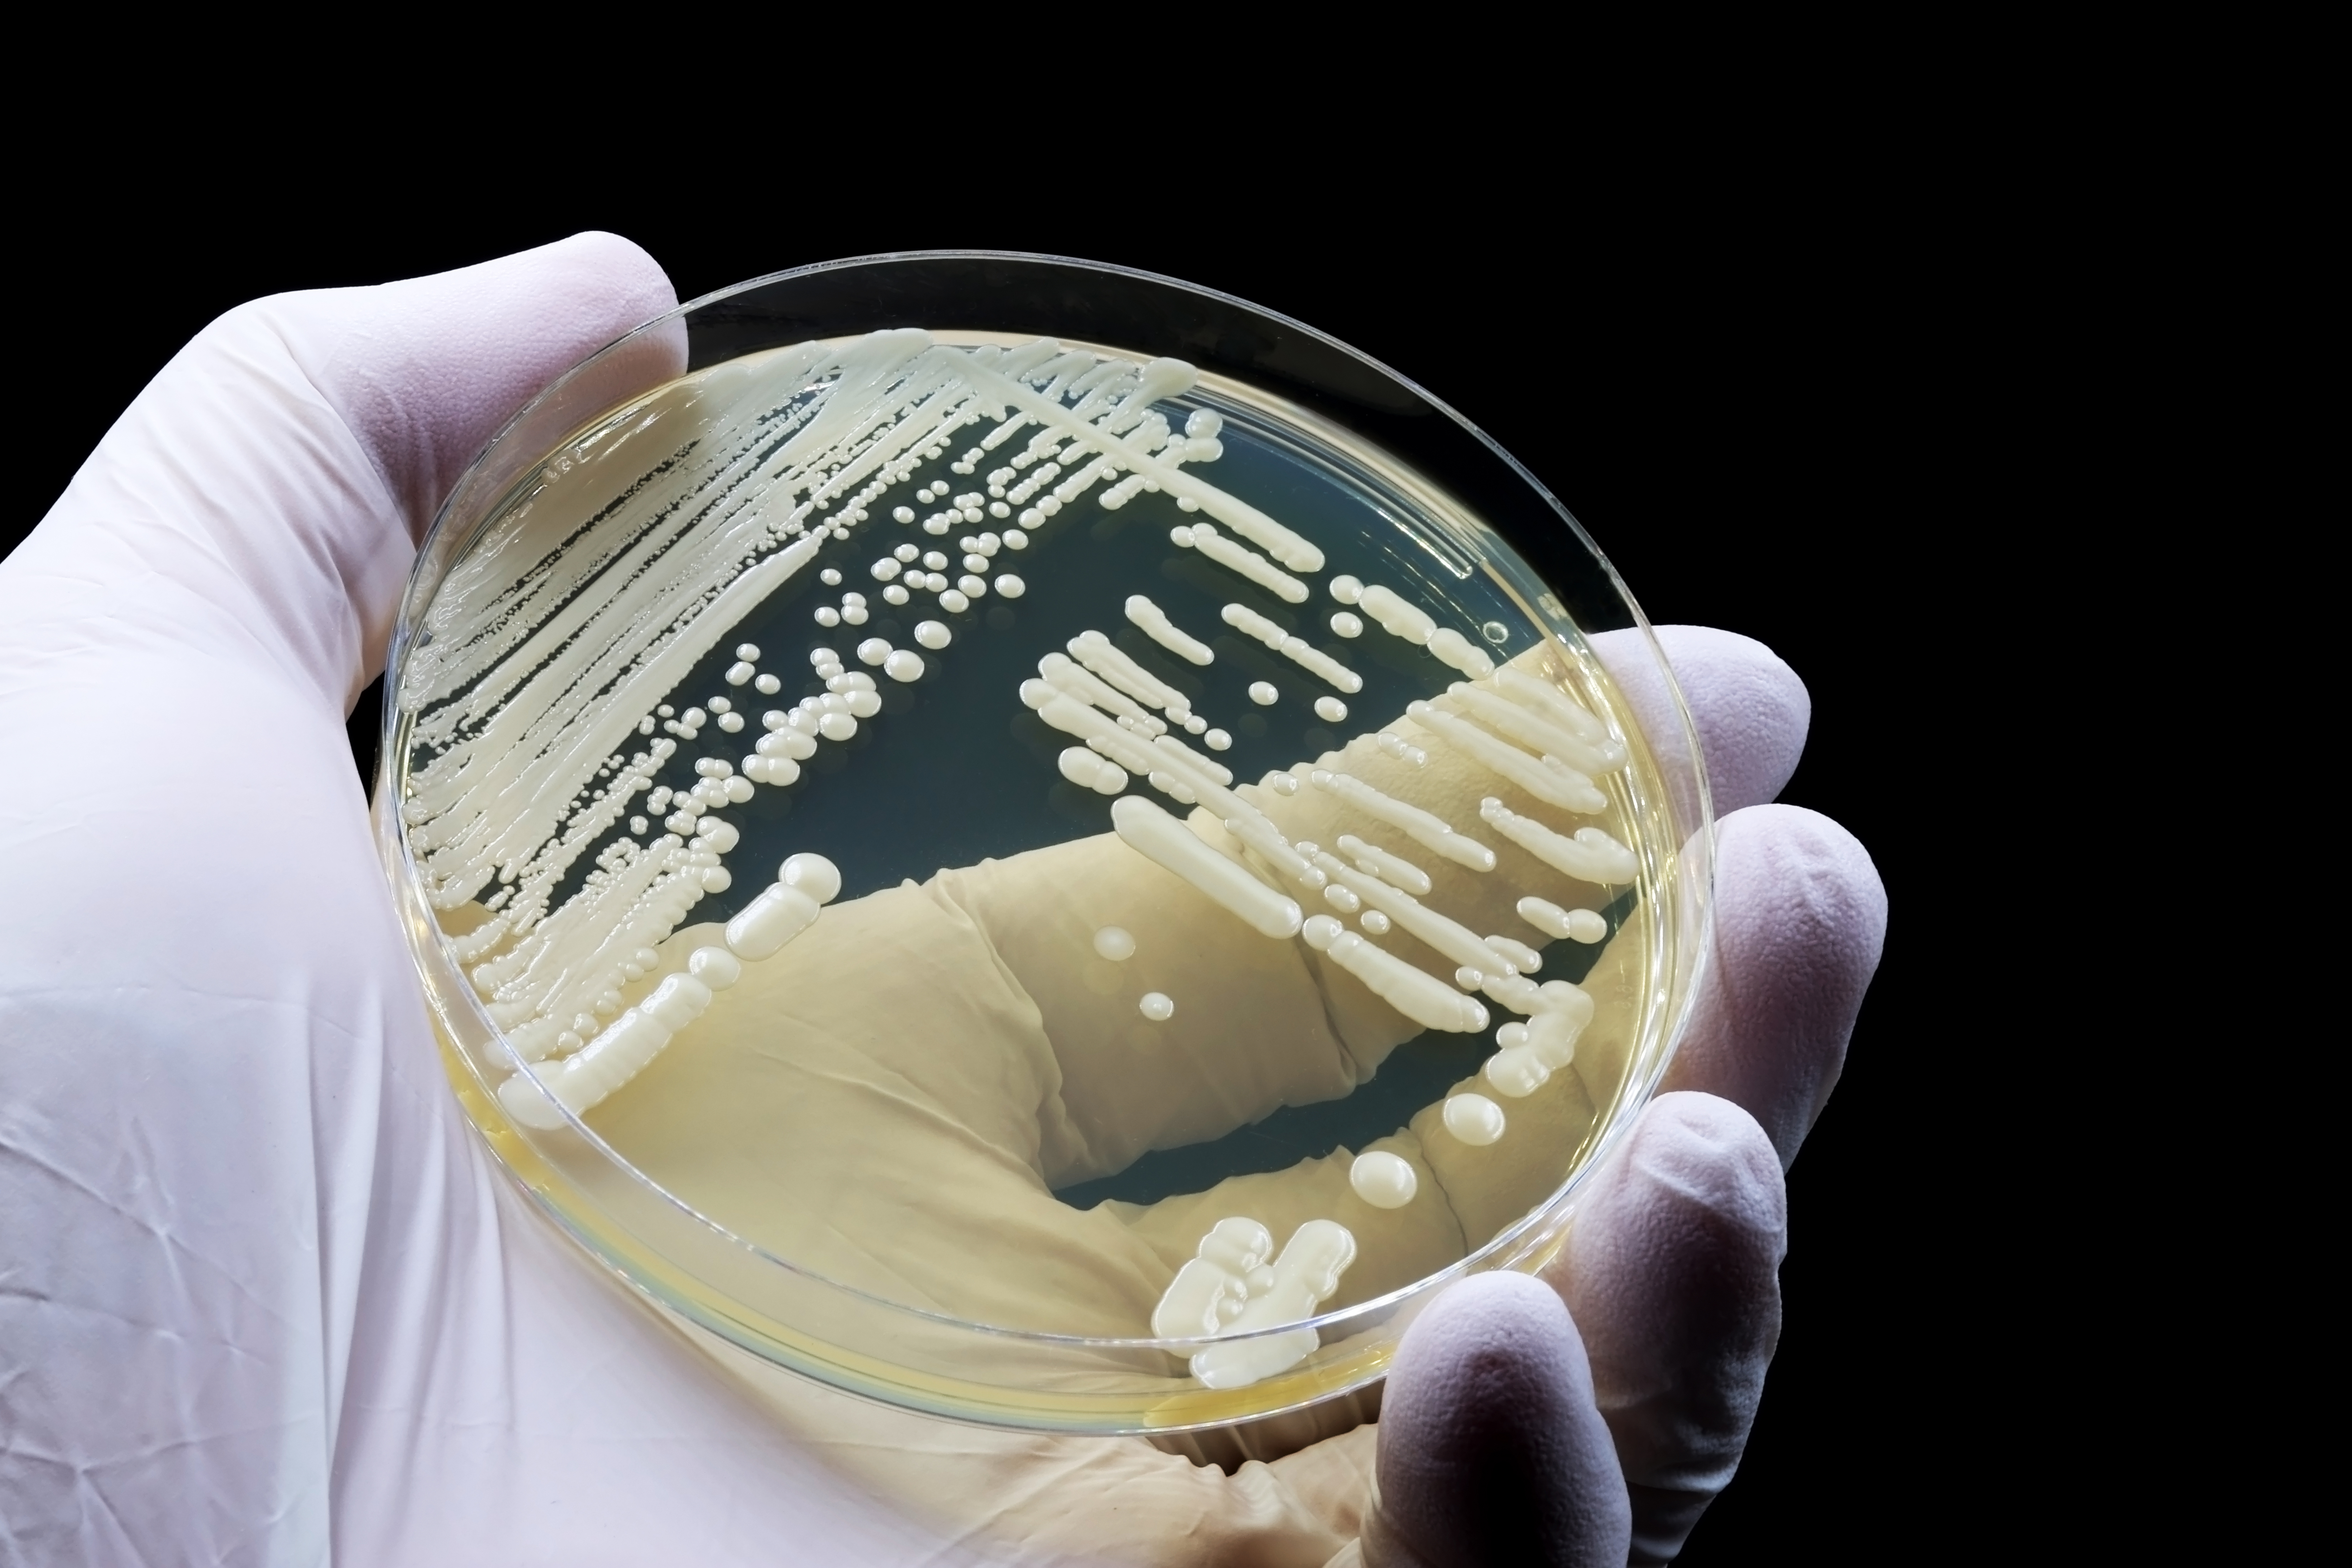 a gloved hand holding a microbiological culture of the yeast Candida auris